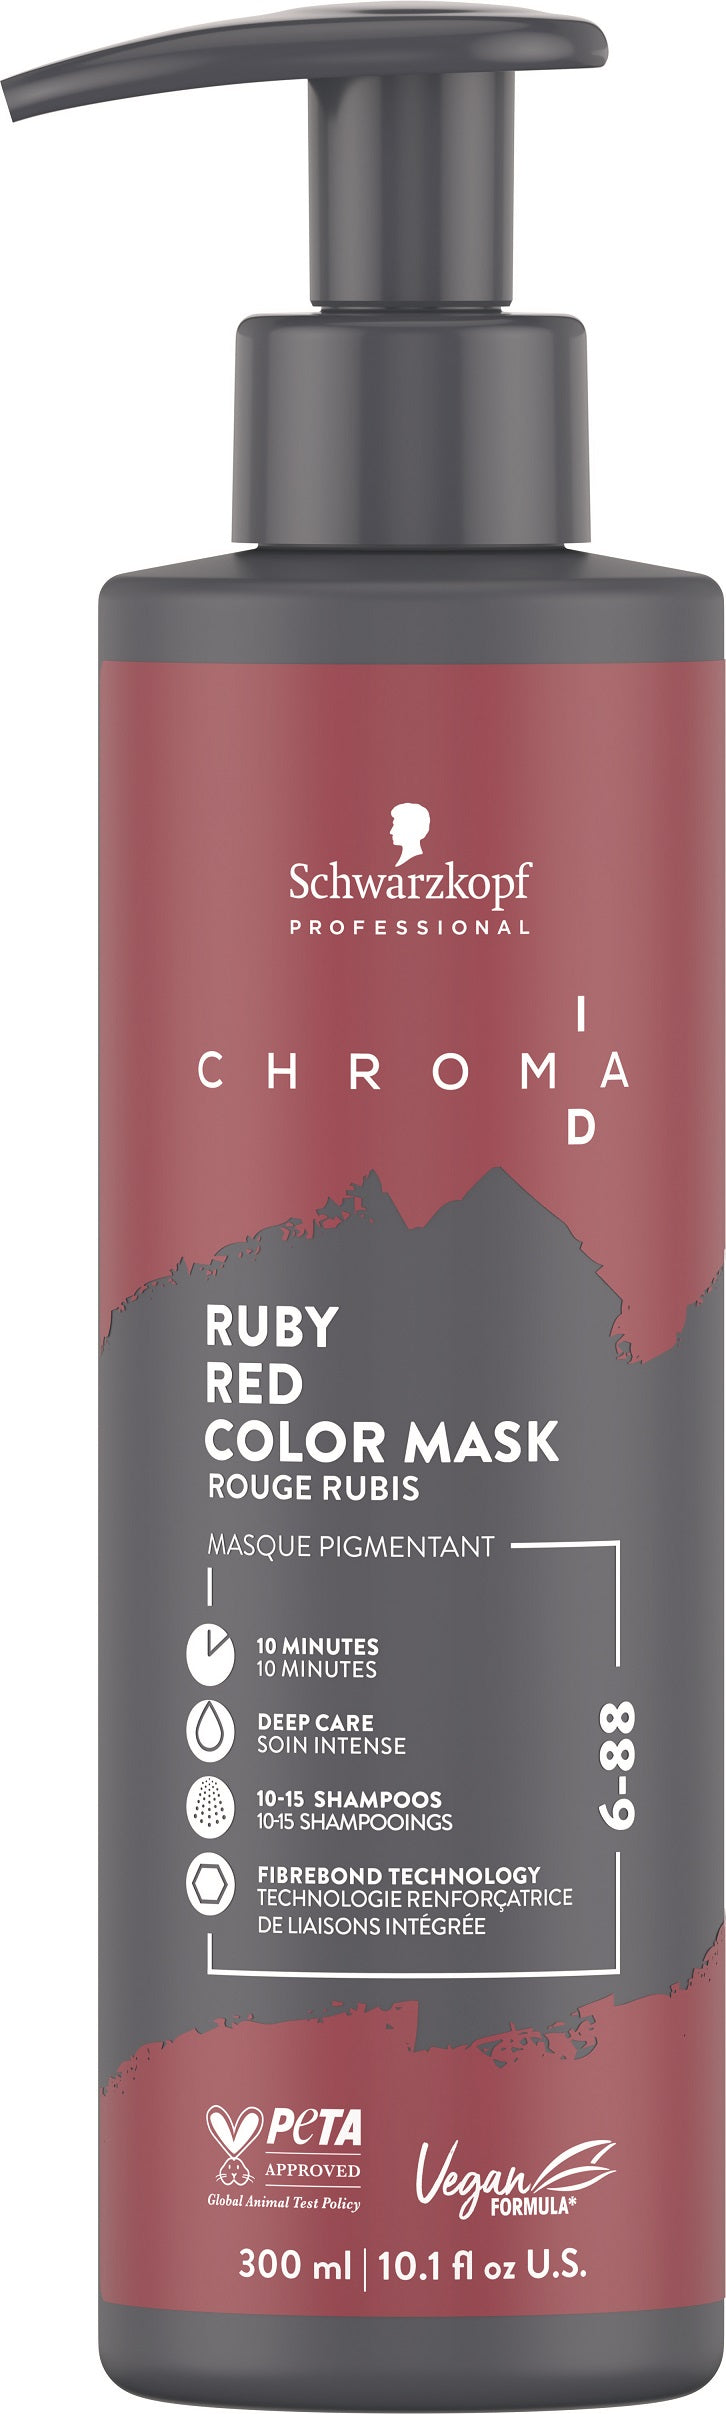 Schwarzkopf Professional Chroma ID 6-88 Ruby Red Bonding Color Mask at Eds Hair Bramhall